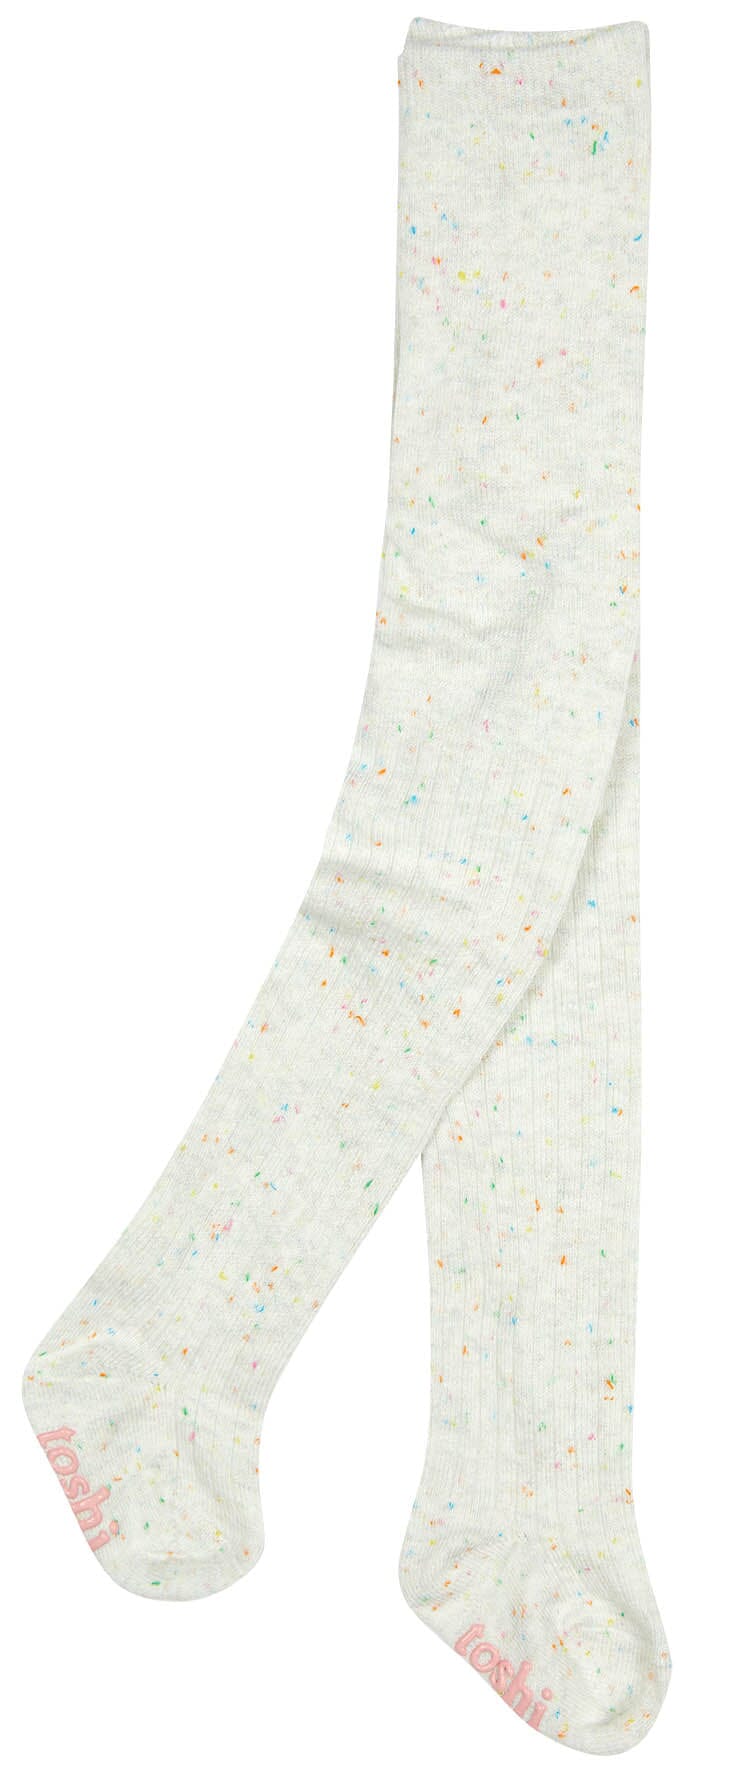 Toshi Organic Dreamtime Footed Tights - Snowflake Tights Toshi 